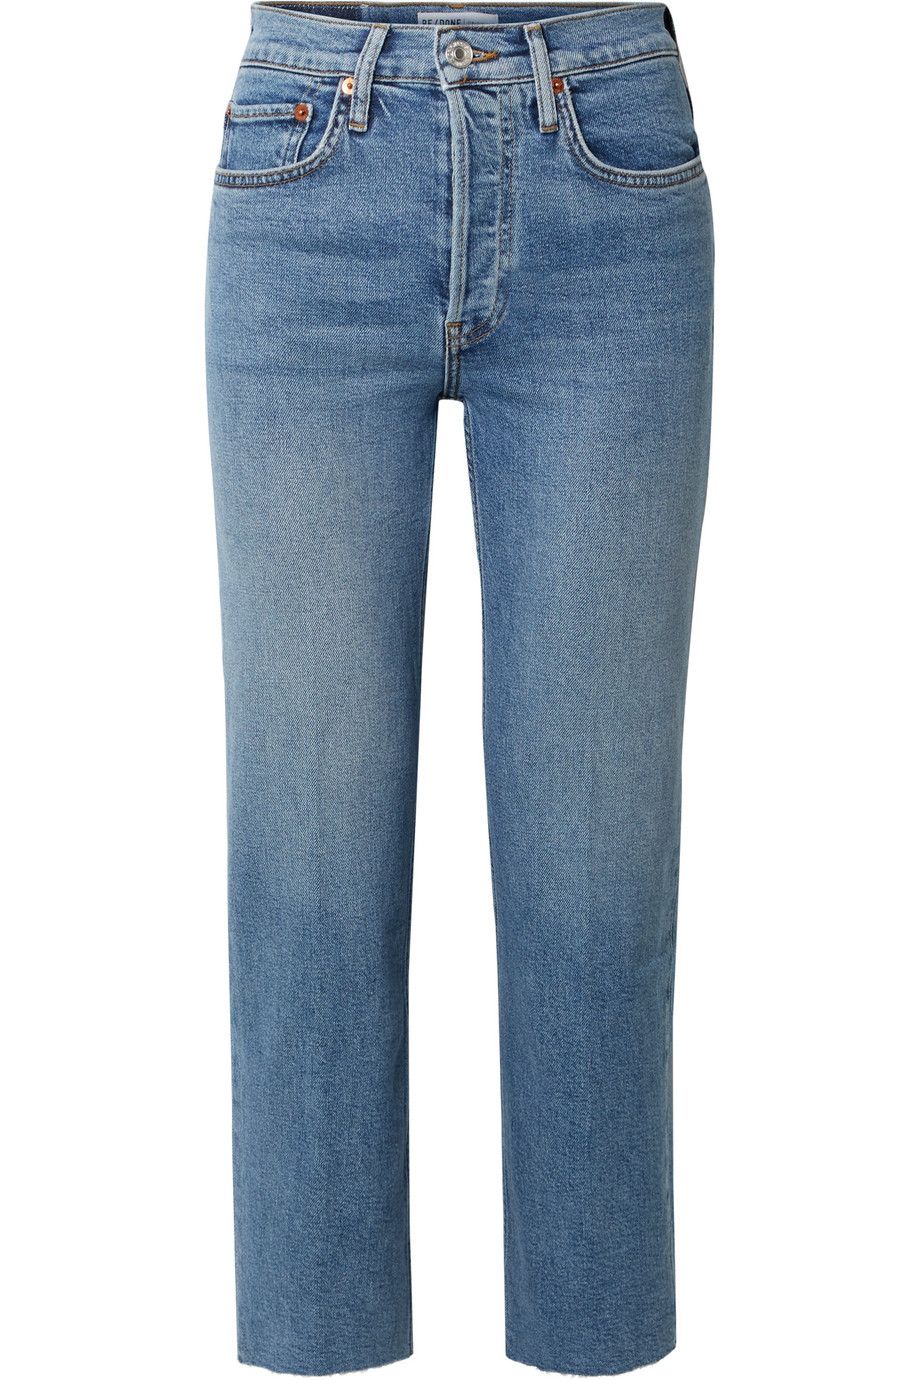 Originals Stove Pipe Comfort Stretch high-rise straight-leg jeans